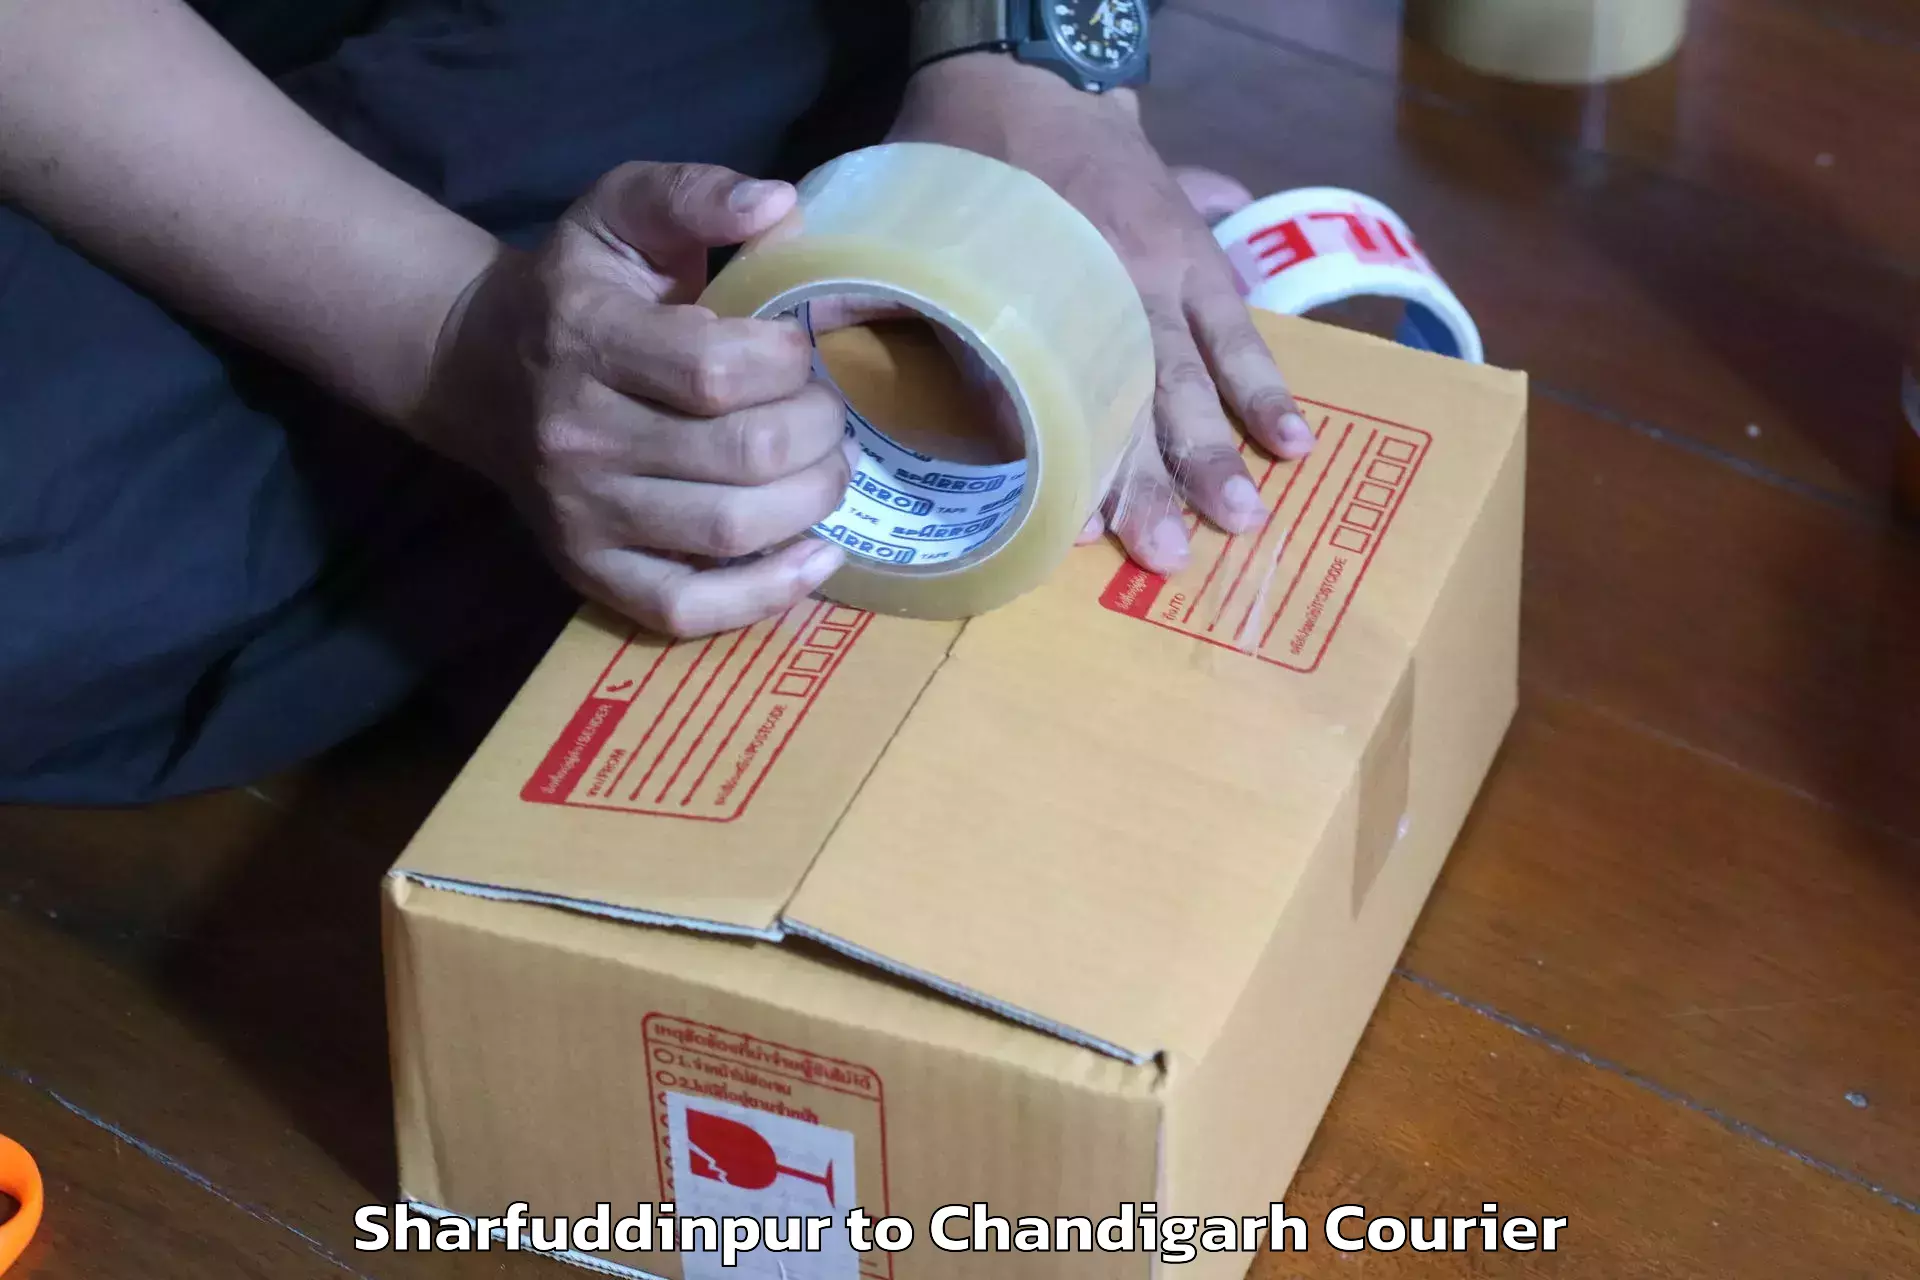 Home relocation experts Sharfuddinpur to Chandigarh